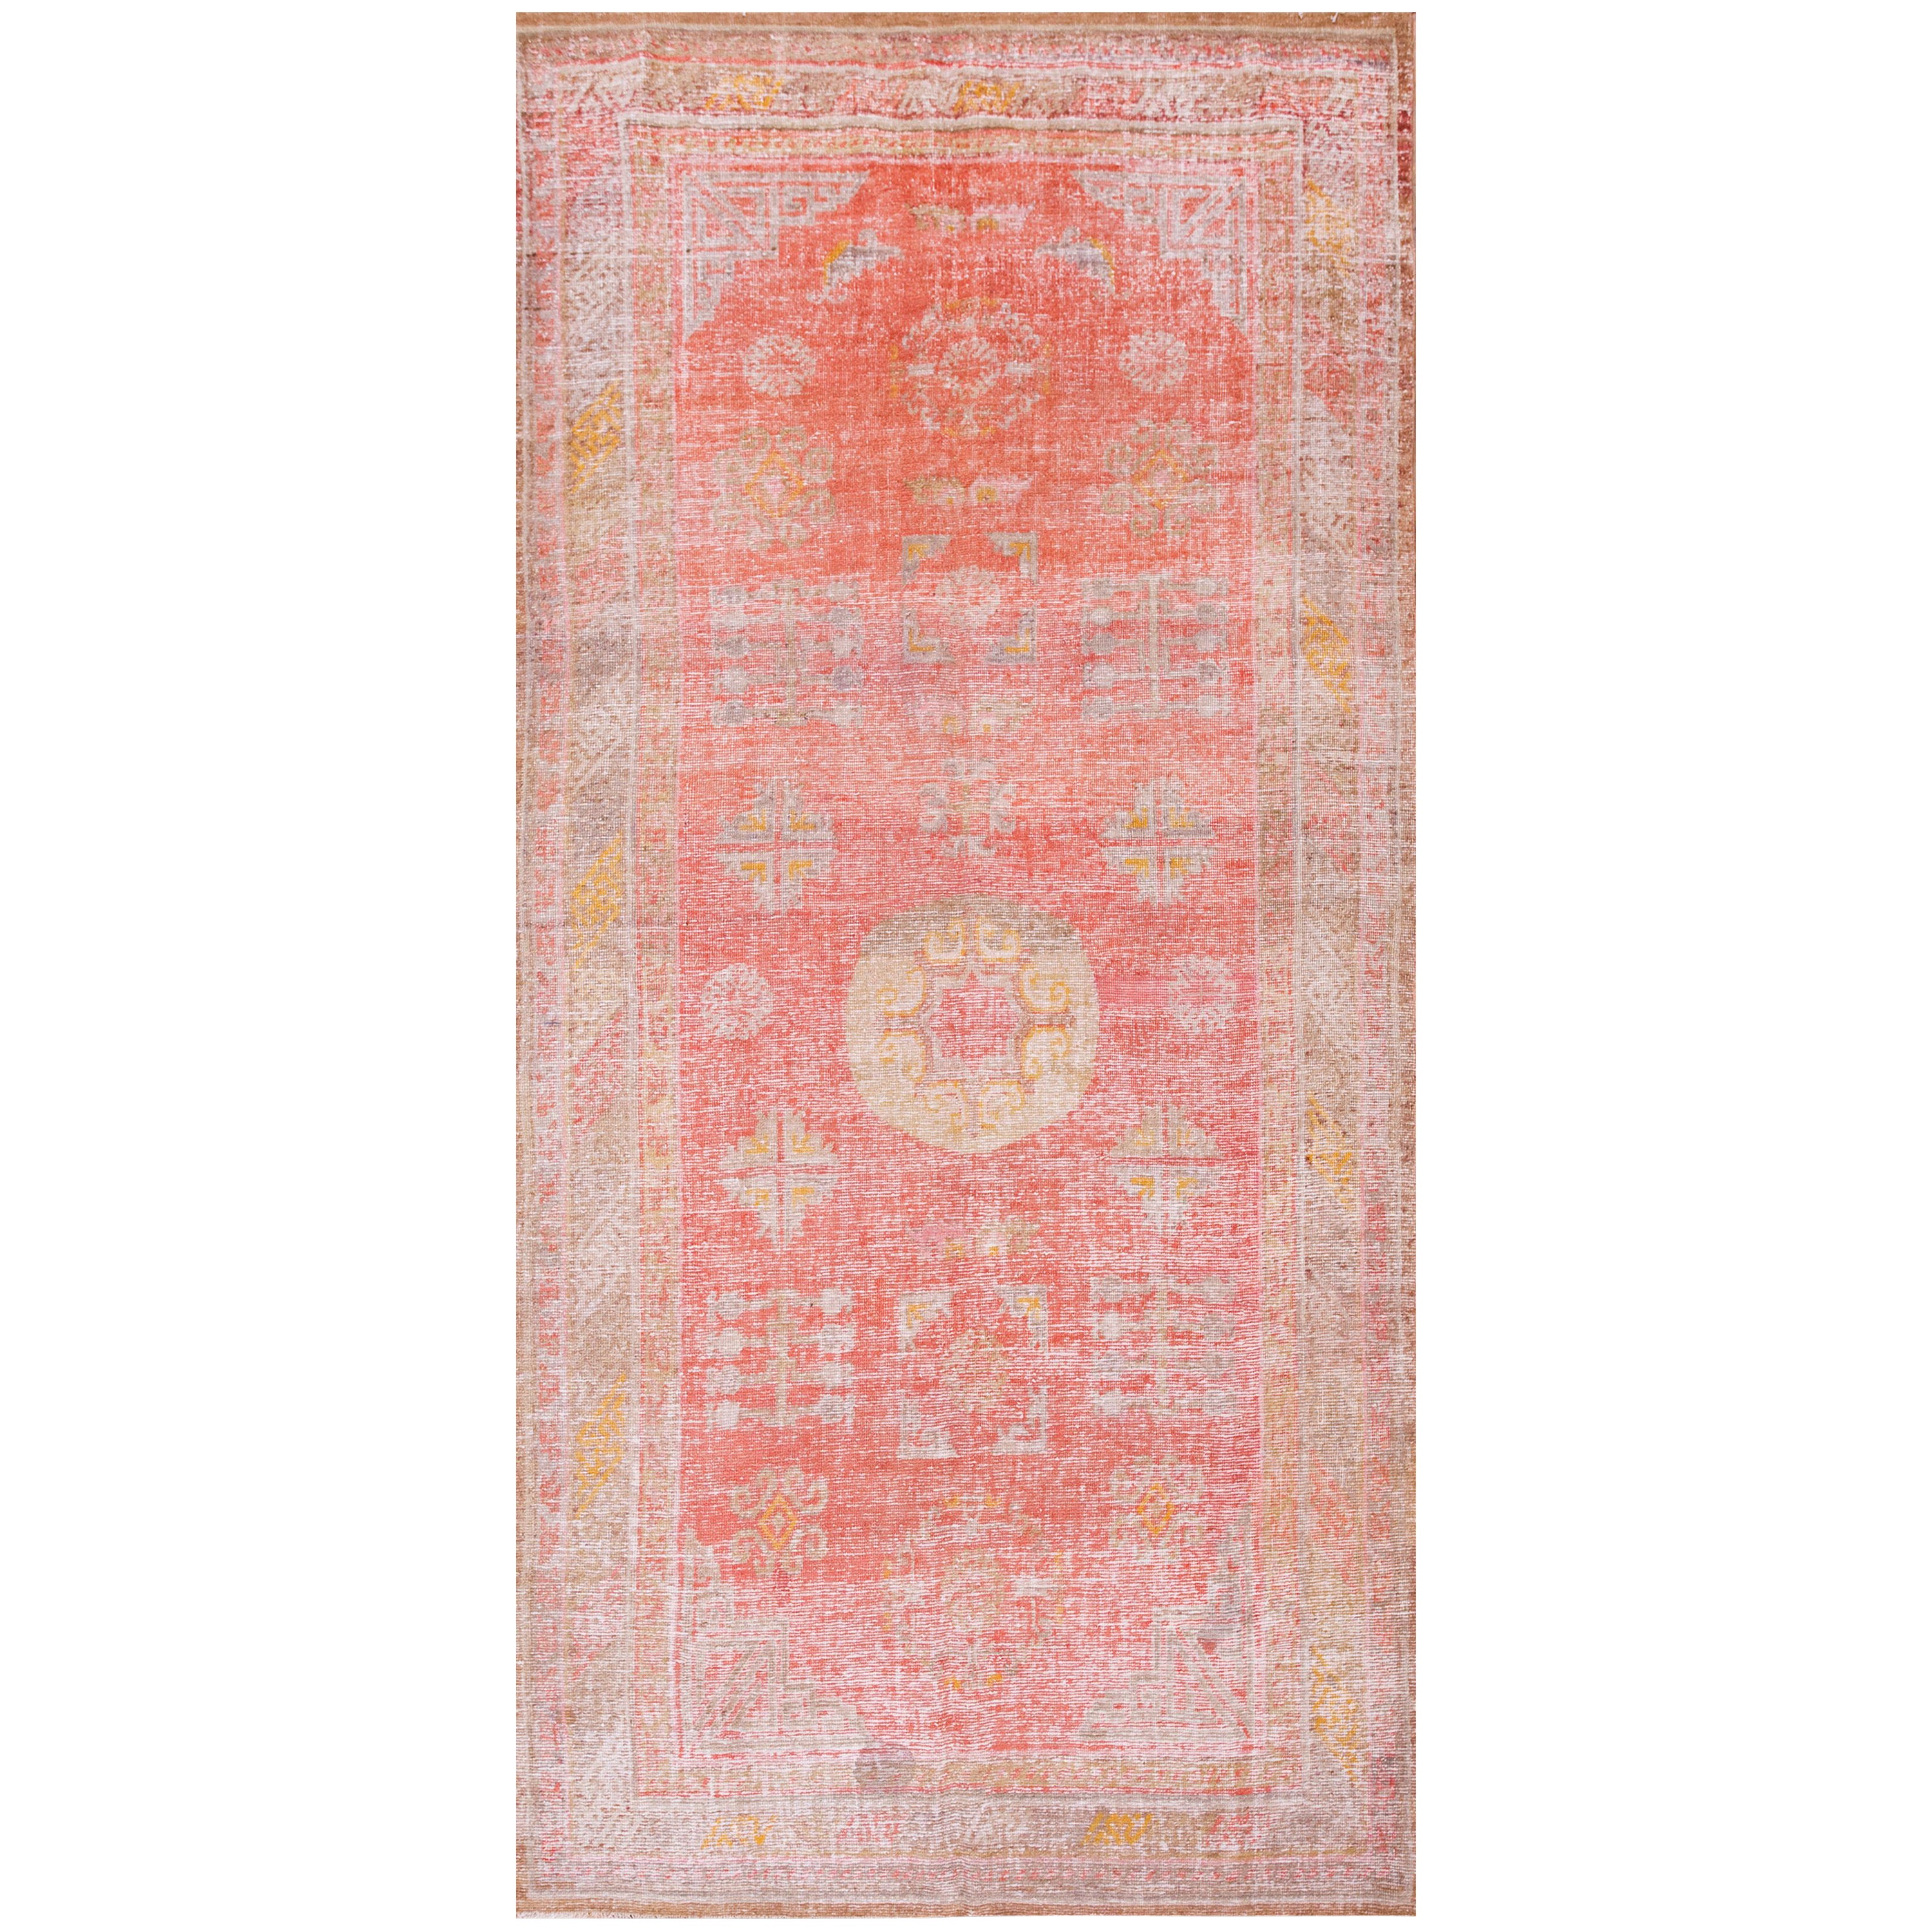 Early 20th Century Chinese Khotan Carpet For Sale